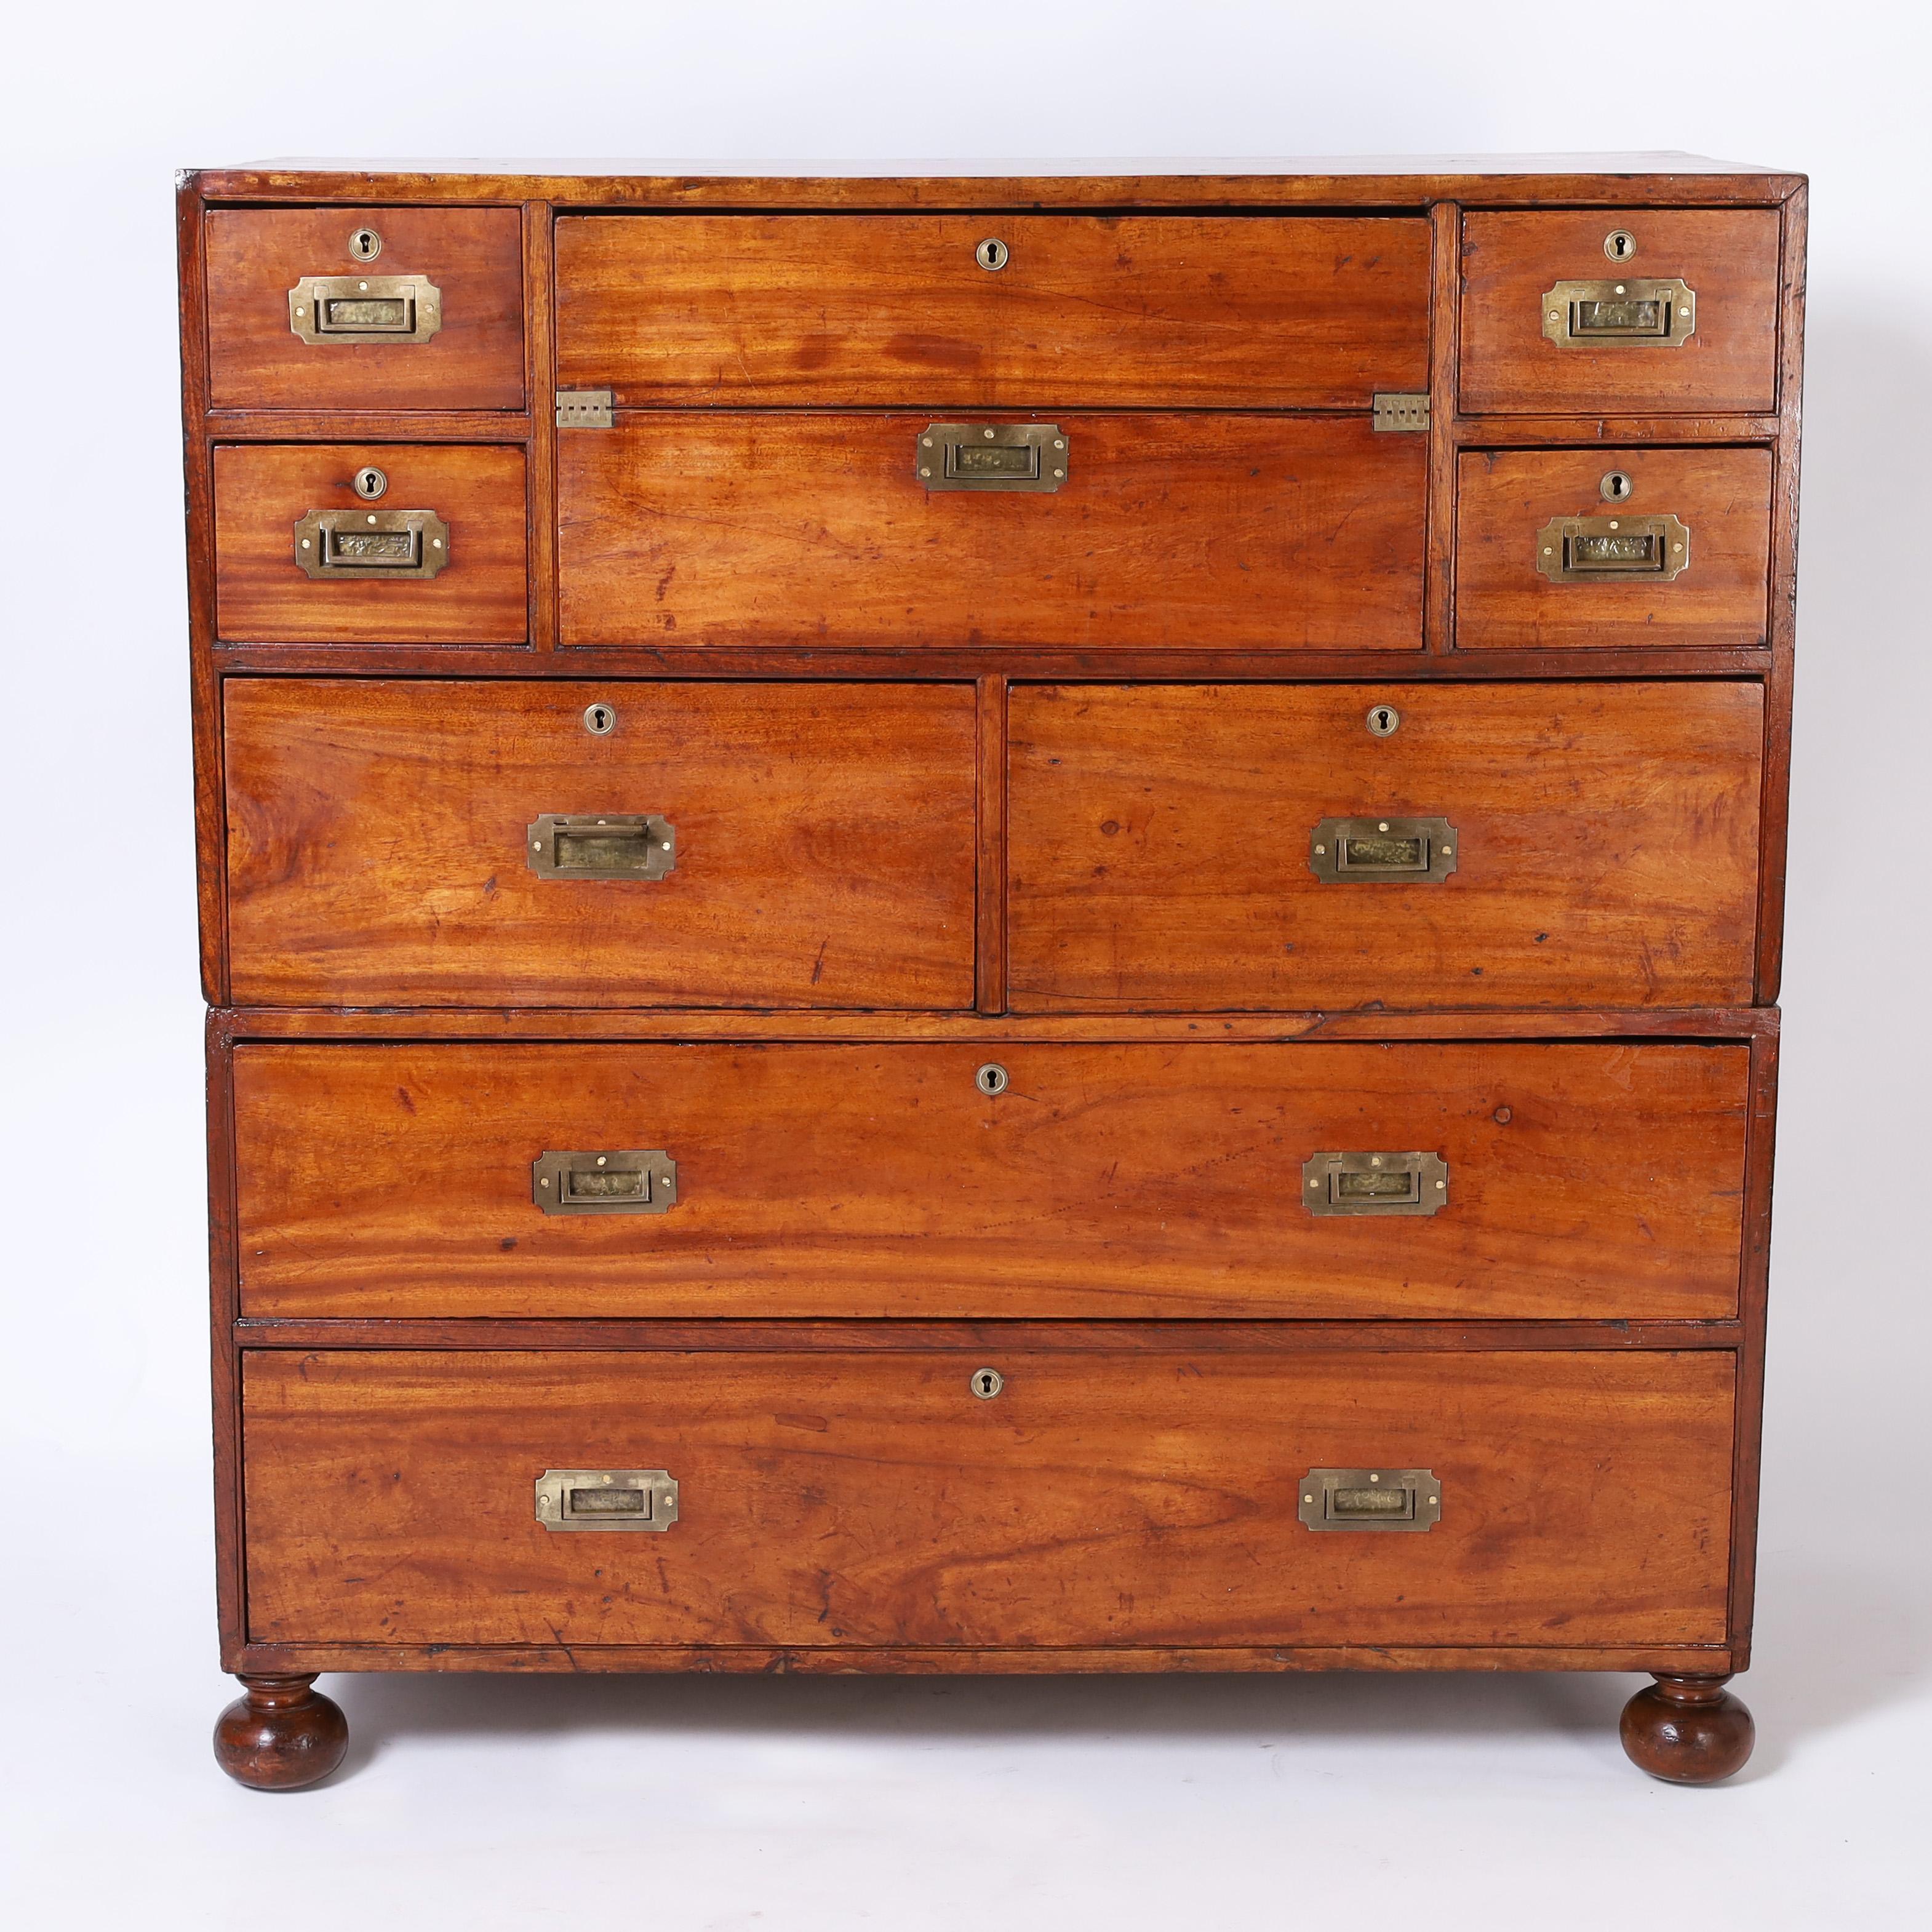 Rare and remarkable 19th century Anglo Chinese chest with eight drawers handcrafted in teak in two piece construction, having a pullout desk with leather writing surface, storage compartments, nooks and crannies, brass campaign hardware and turned